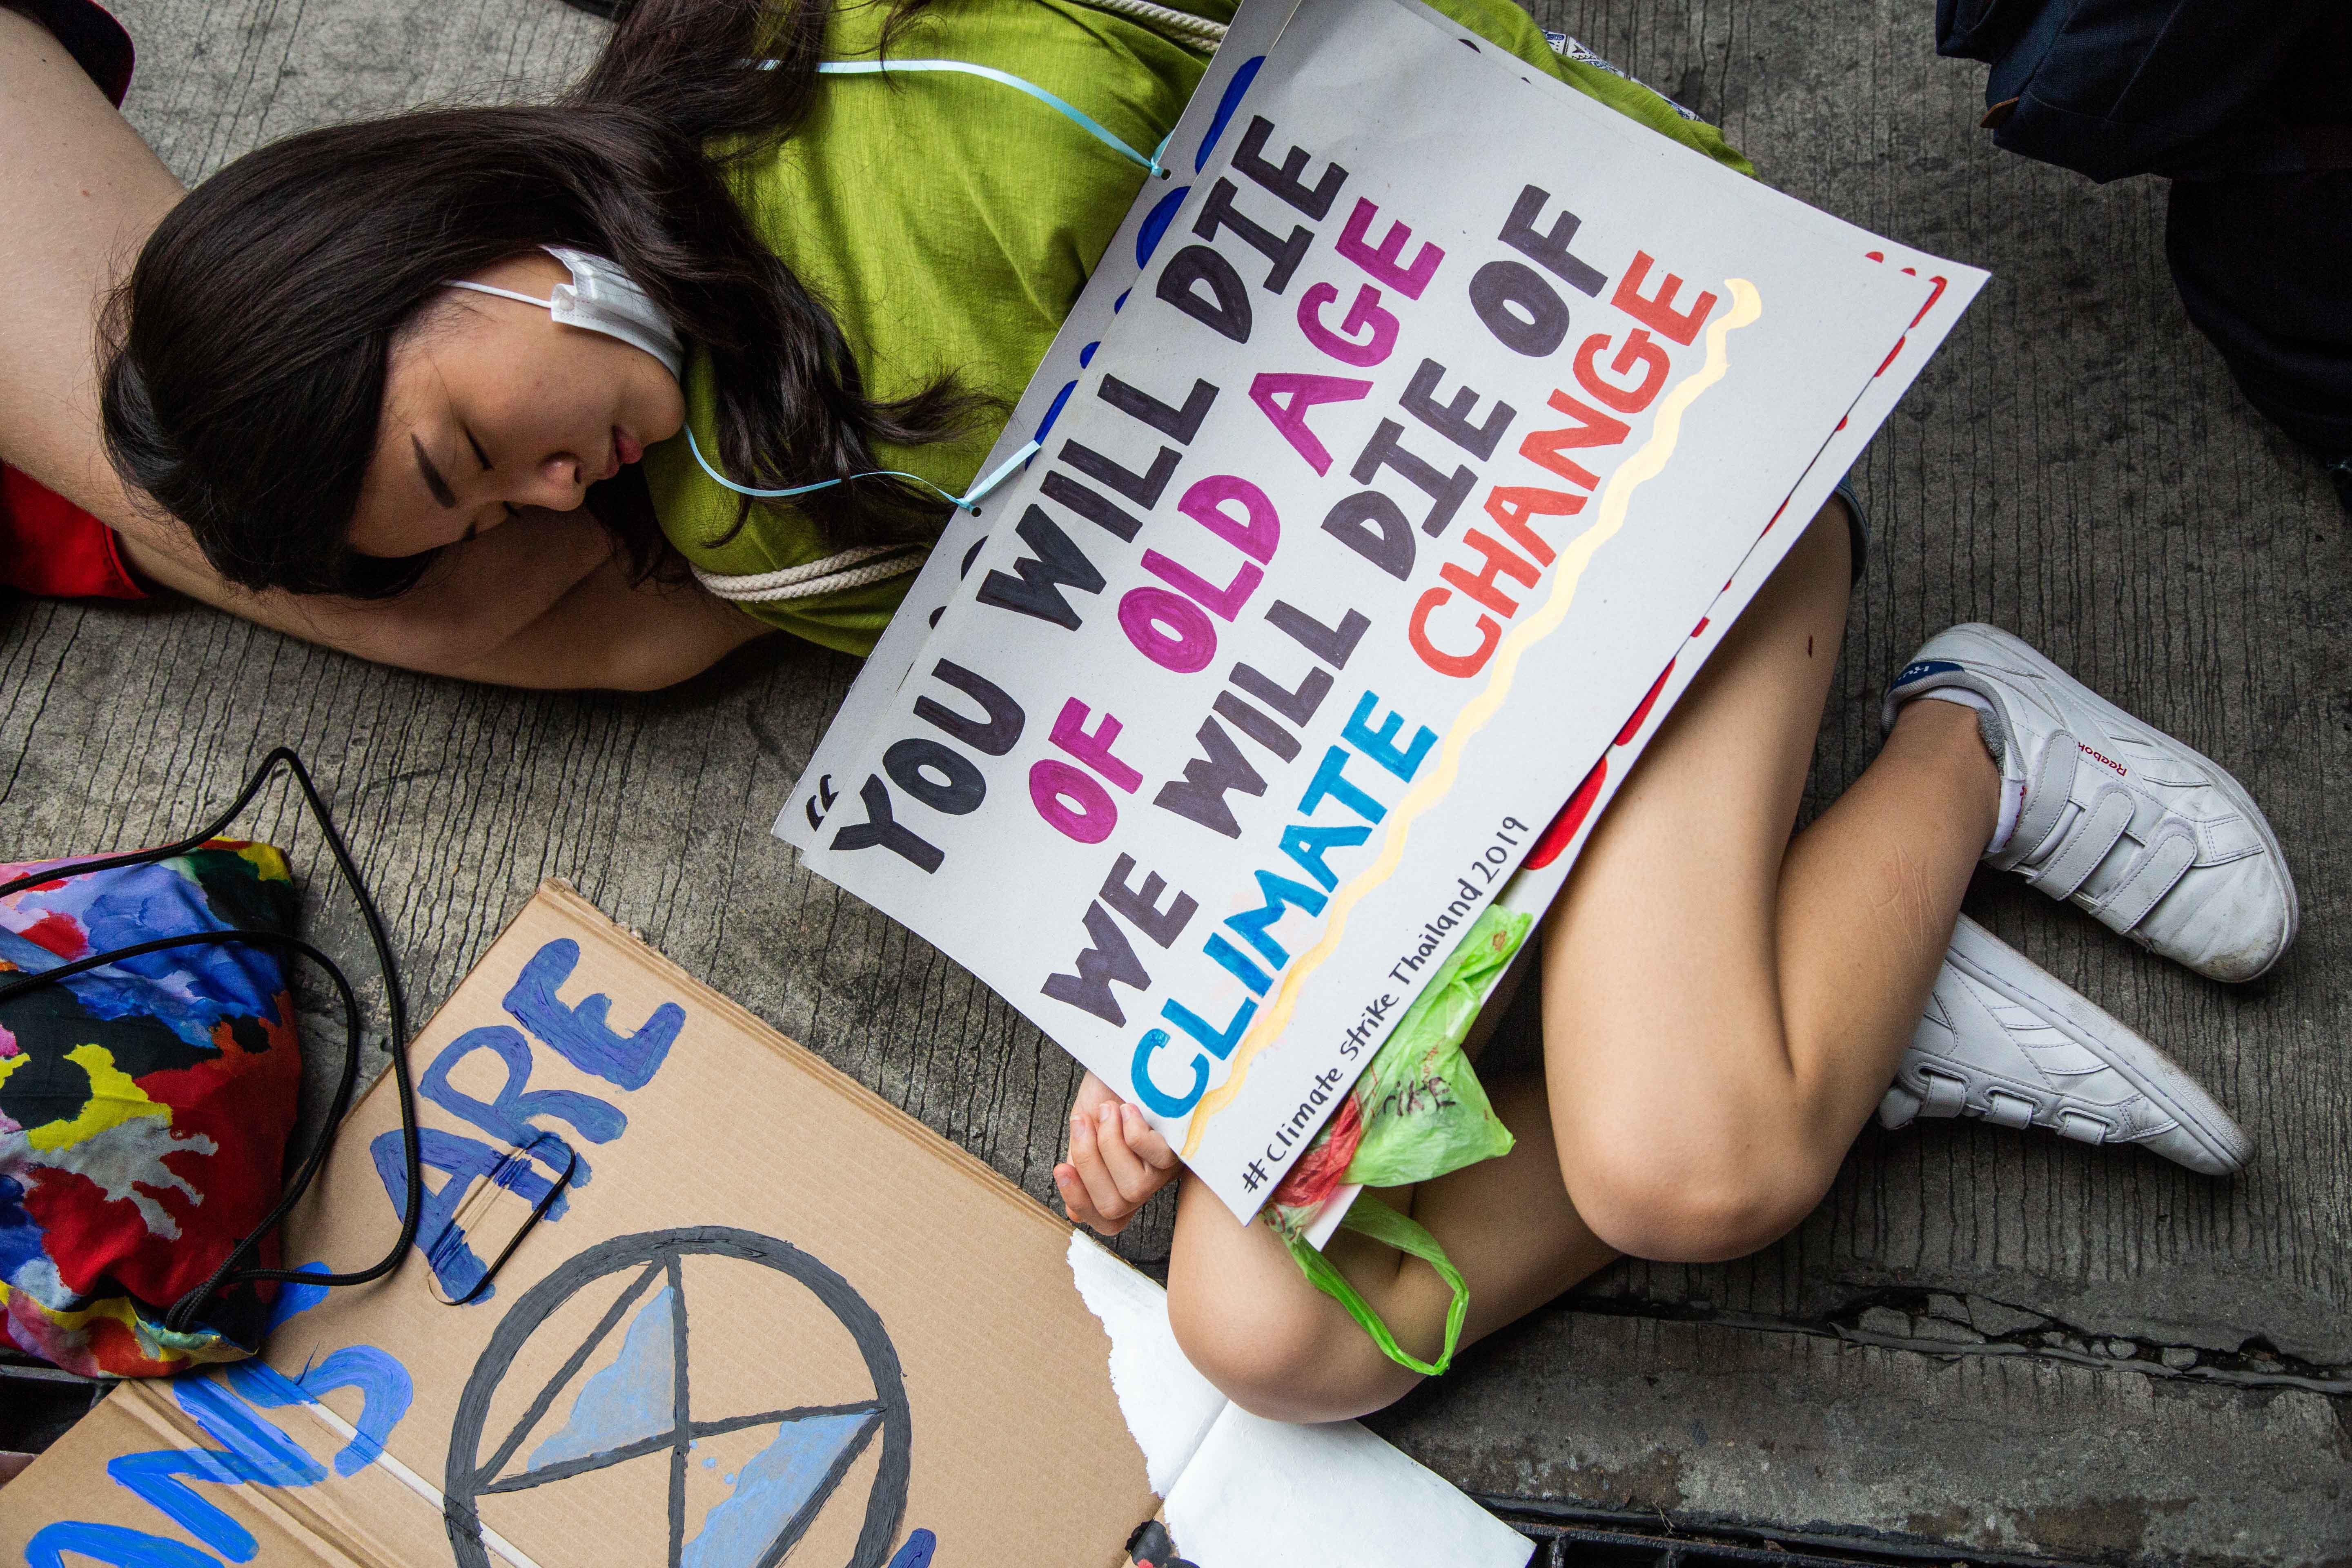 A girl lies on the ground, under a sign that says "you will die of old age, we will die of climate change."